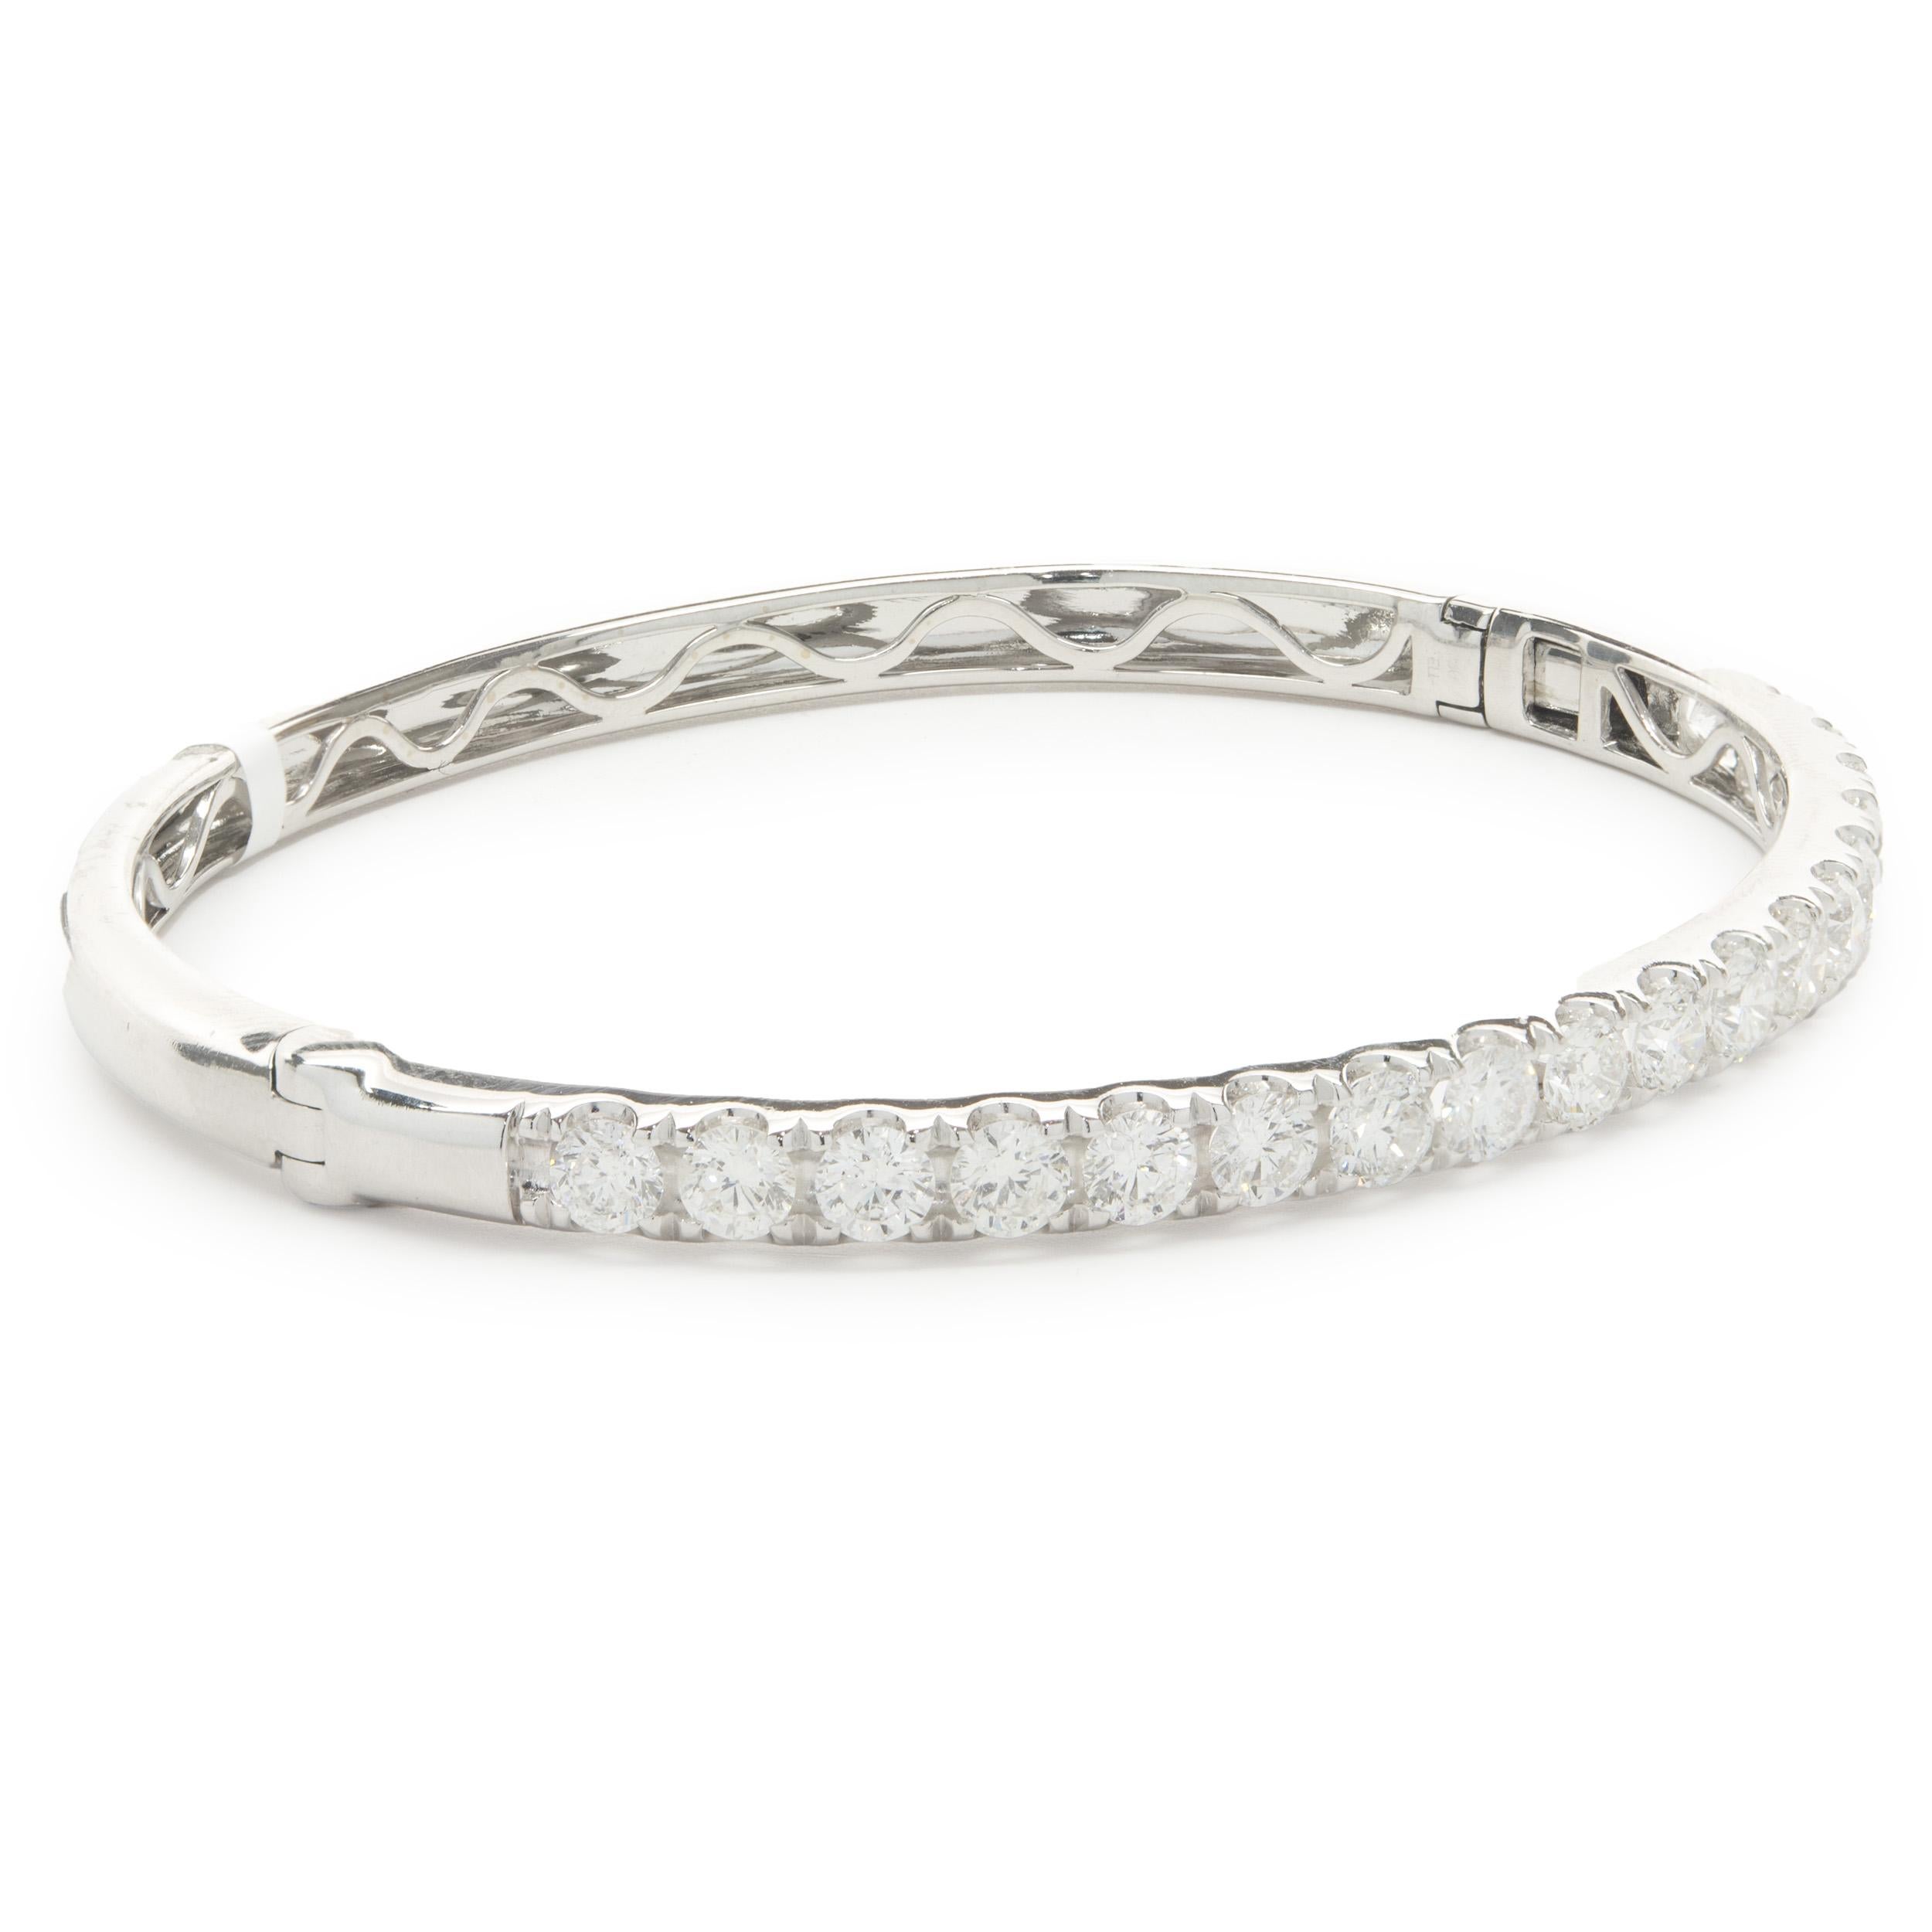 Designer: custom design
Material: 18K white gold
Diamonds: 19 round brilliant cut = 4.00cttw
Color: F
Clarity: VS2
Dimensions: bracelet will fit up to a 7.5-inch wrist
Weight: 15.48 grams